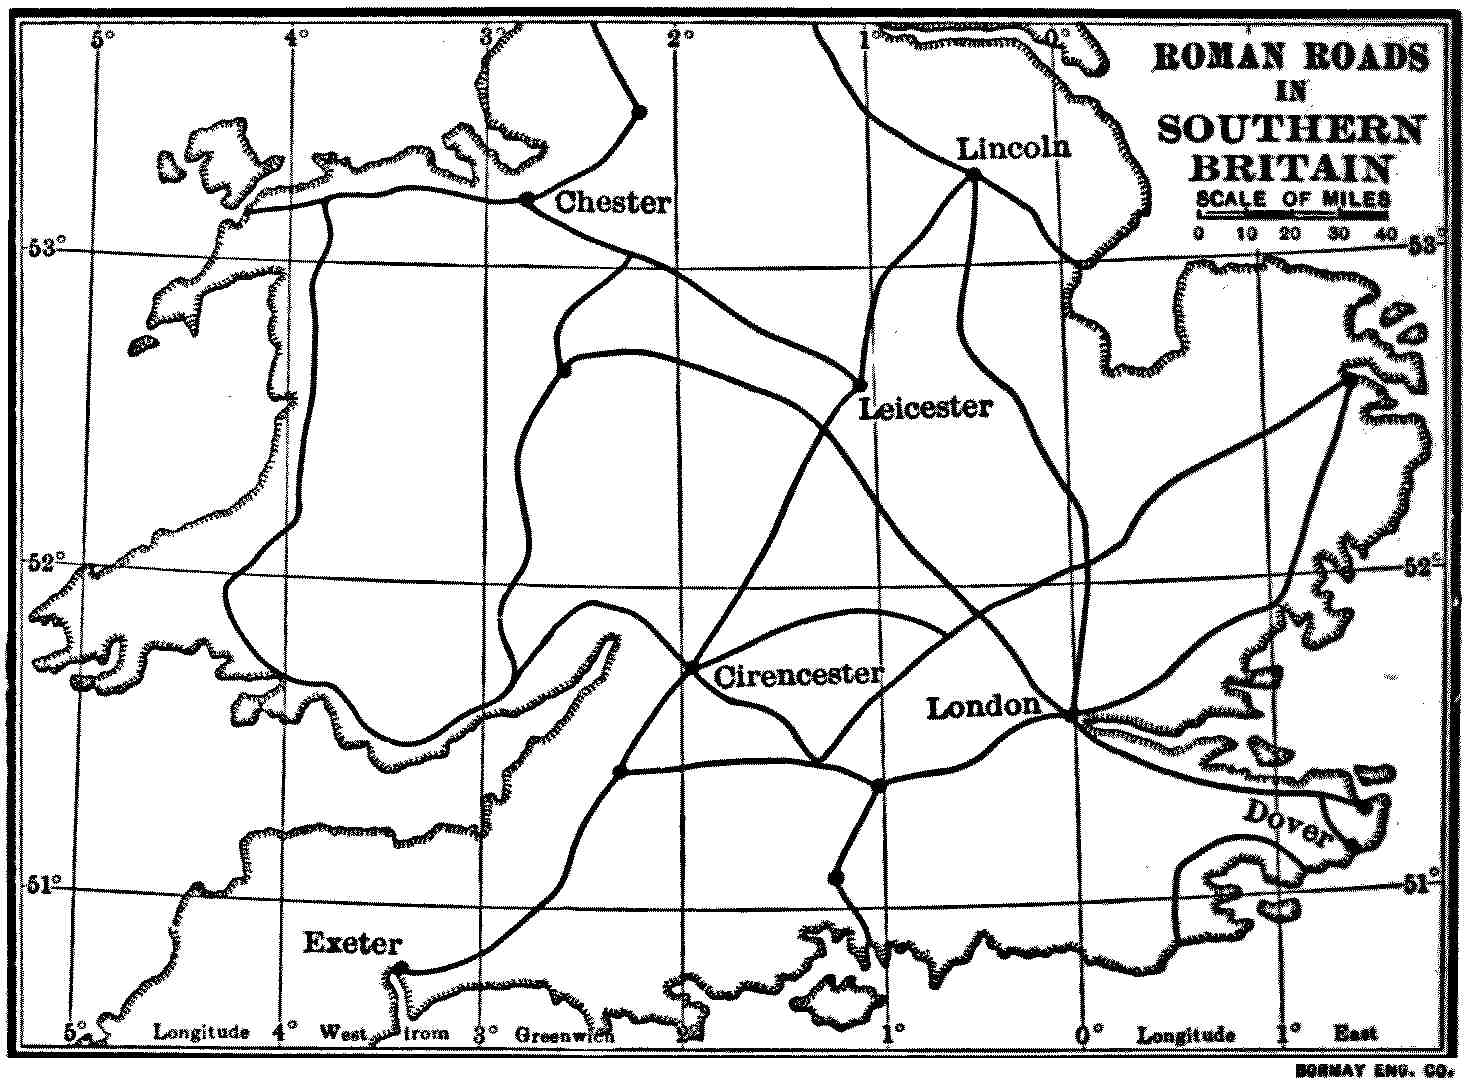 New Rail Road and County Map of Arkansas, Louisiana, & Mississippi. : Cram,  George Franklin : Free Download, Borrow, and Streaming : Internet Archive